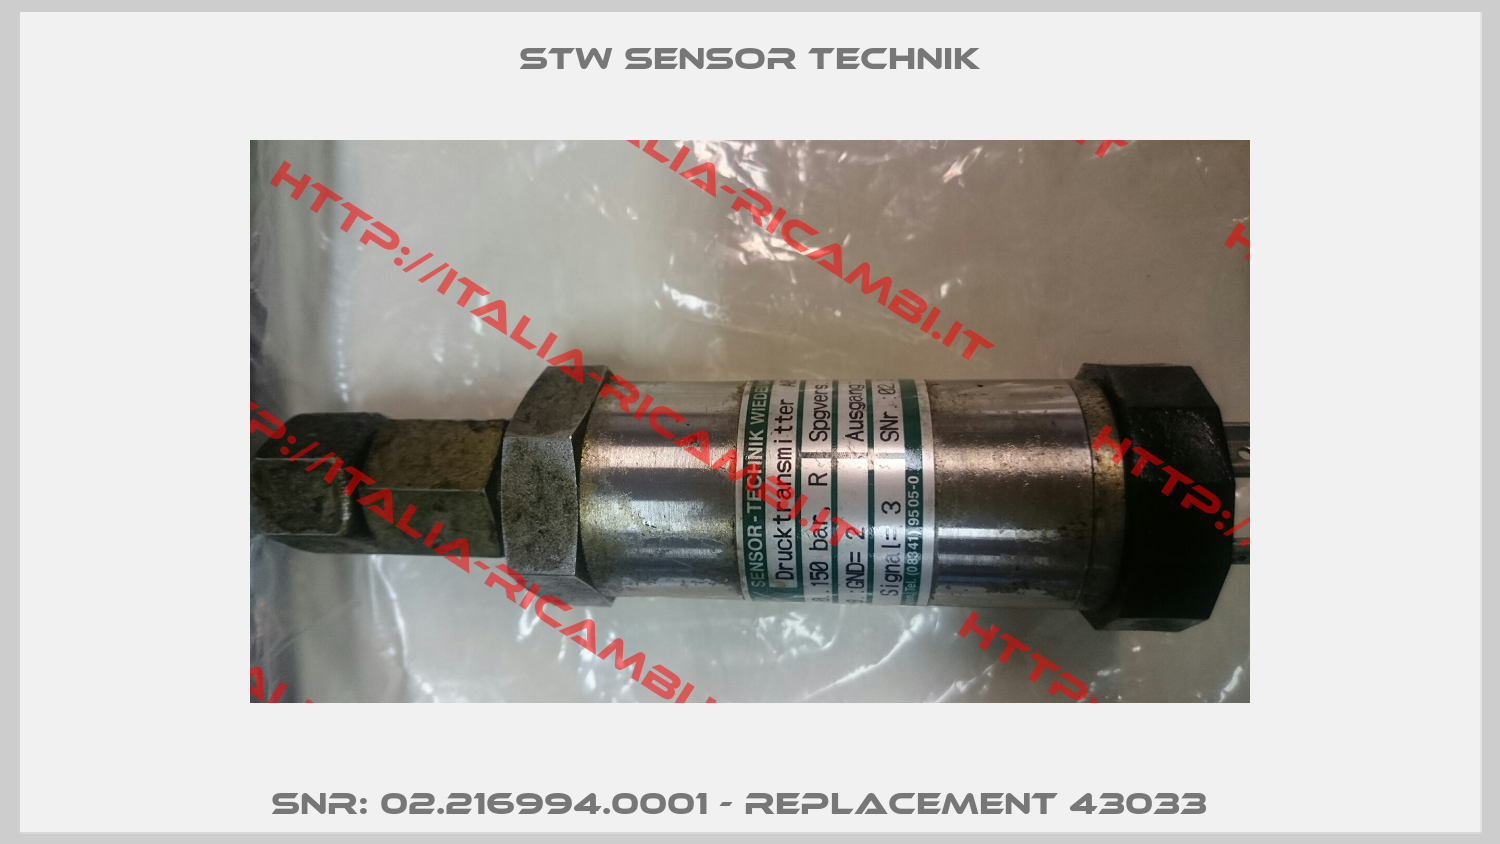 SNr: 02.216994.0001 - replacement 43033  -1